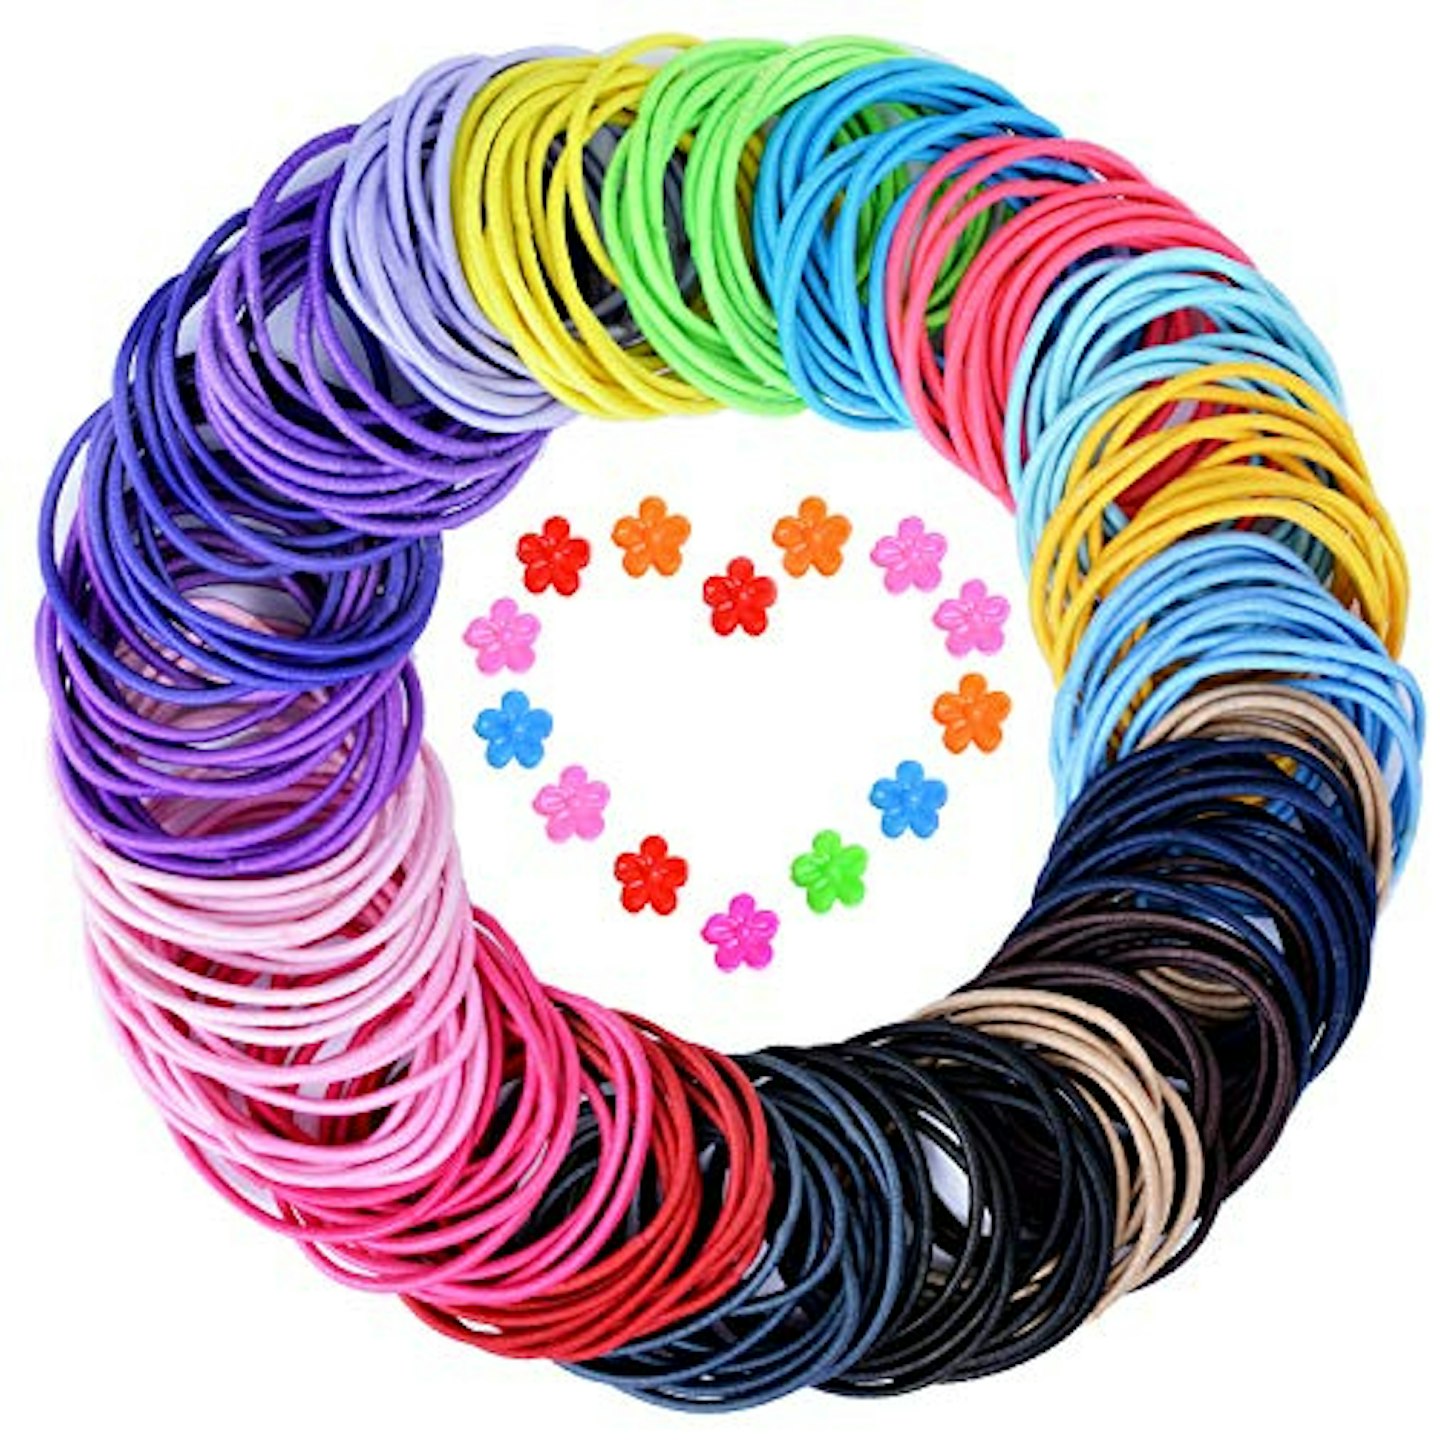 Best back to school hairstyles and accessories 200Pcs Hair Ties